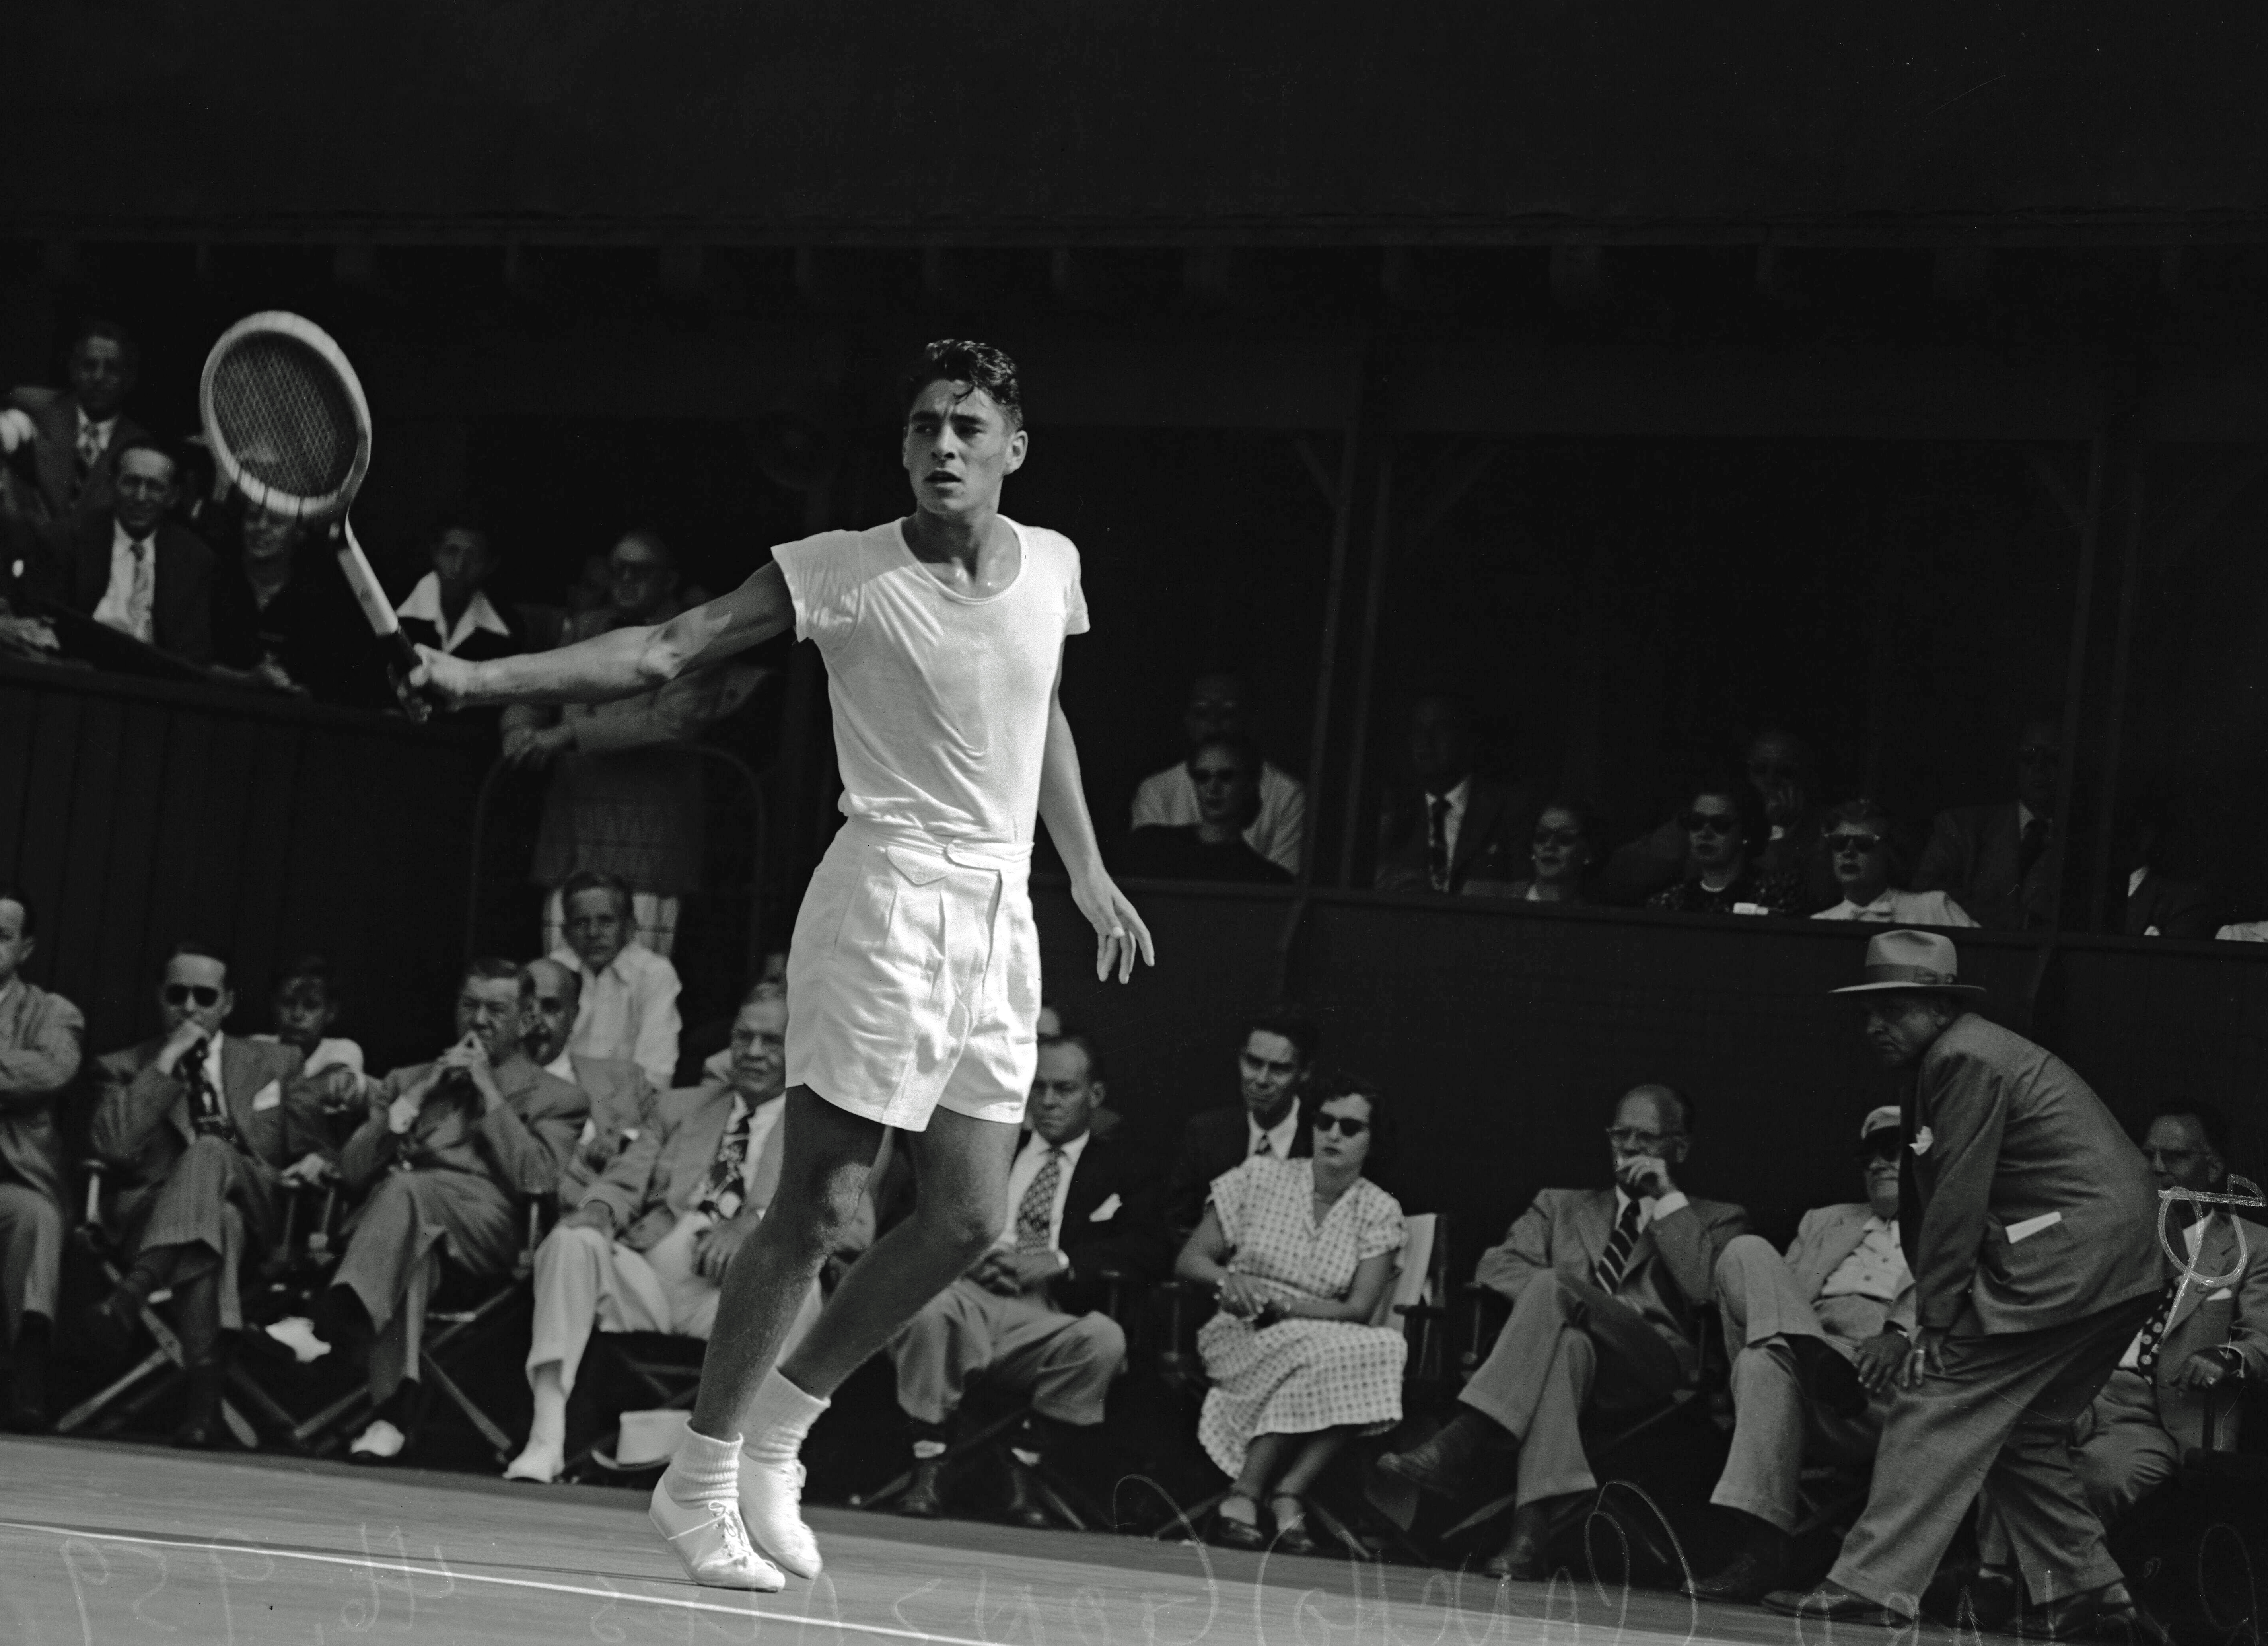 Gonzales in a tournament in Los Angeles, {{circa|1950}}